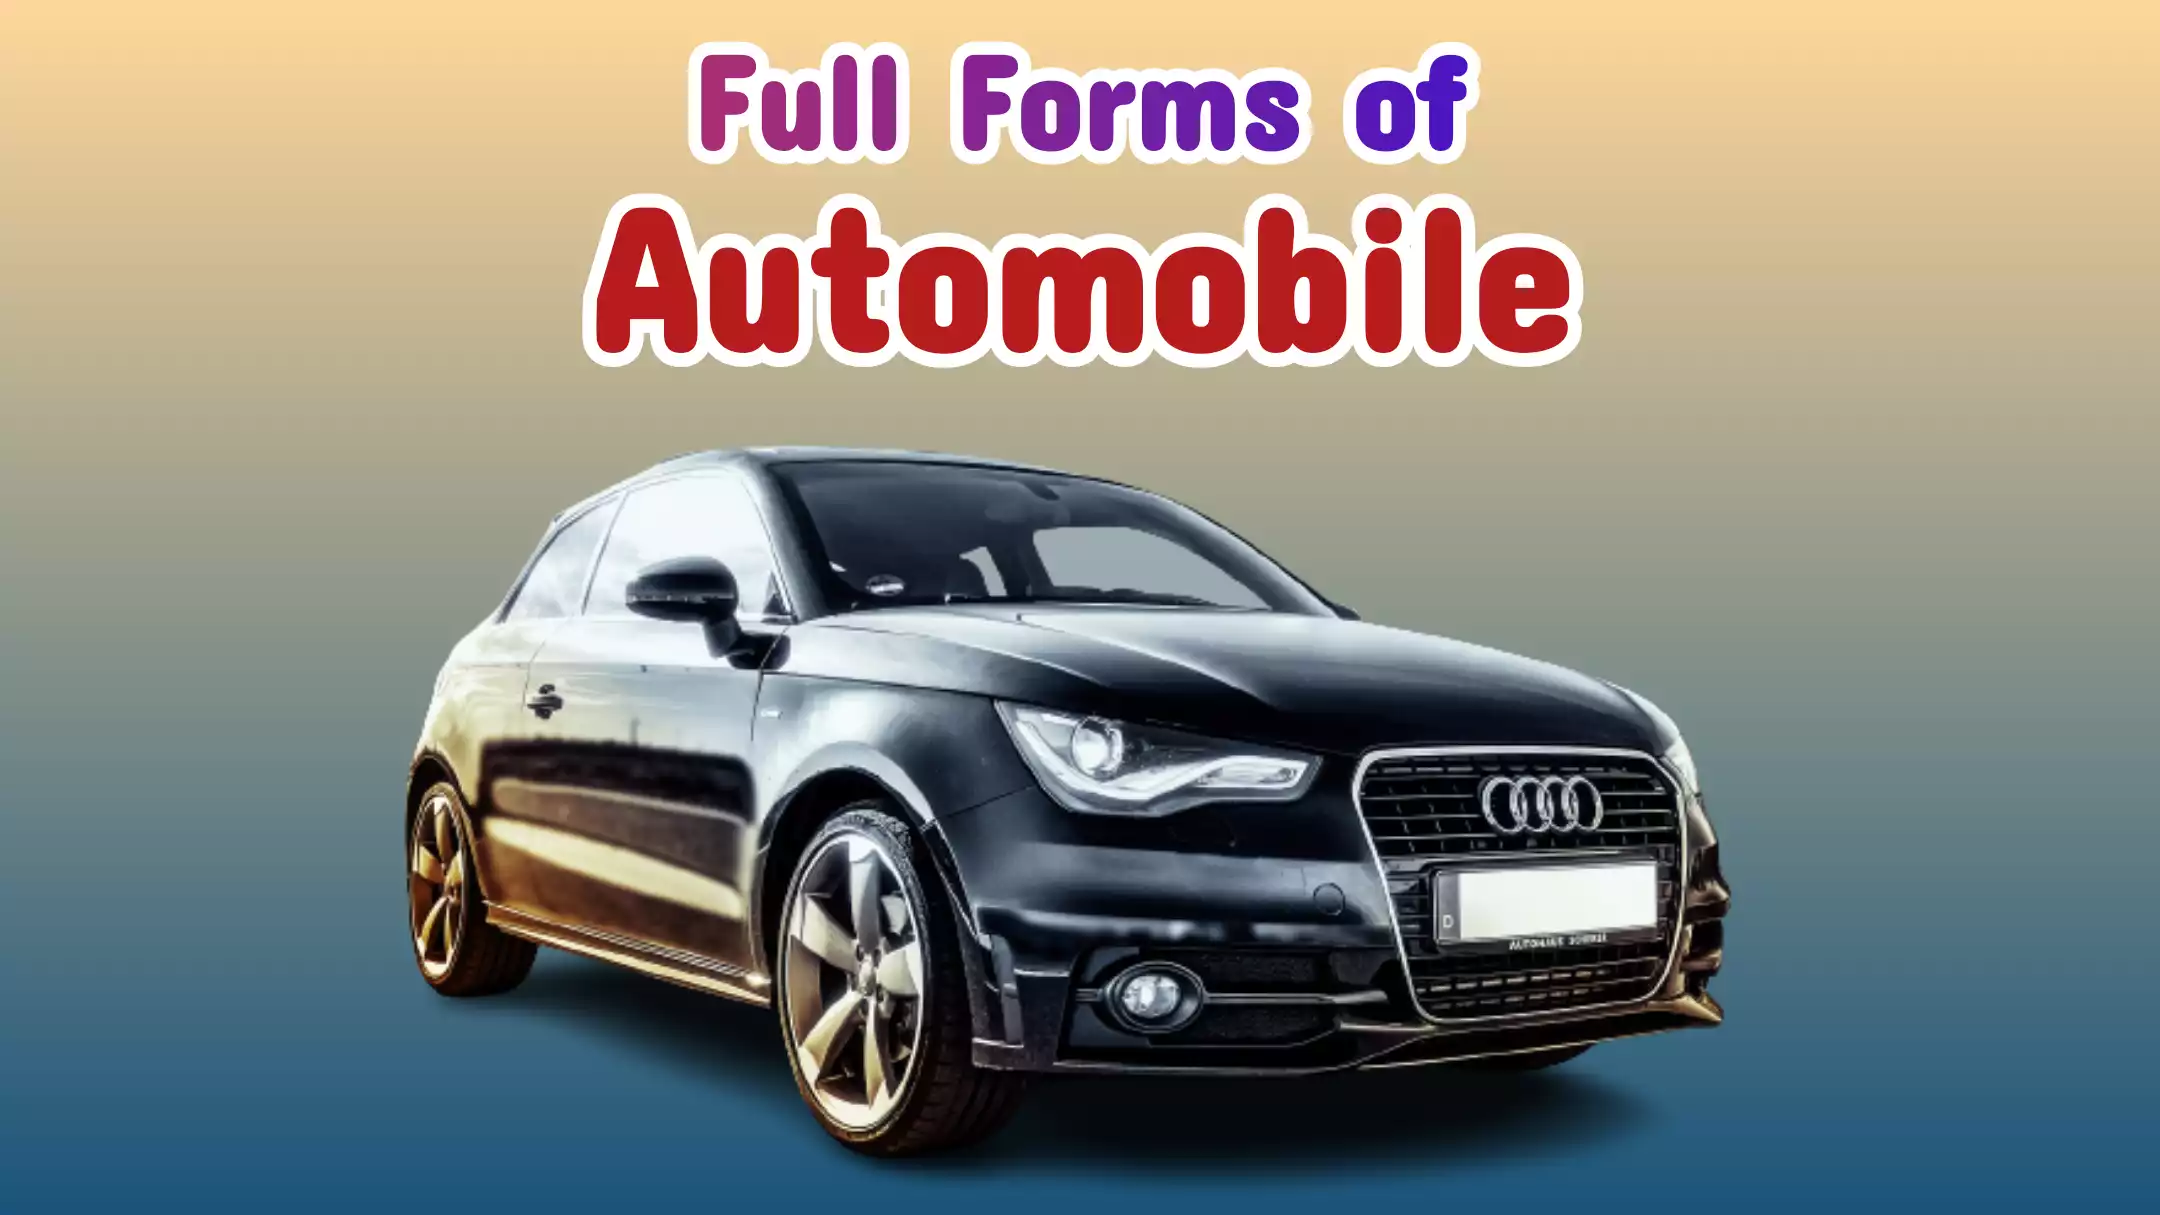 Automobile Full Forms | Full Forms of Automobile